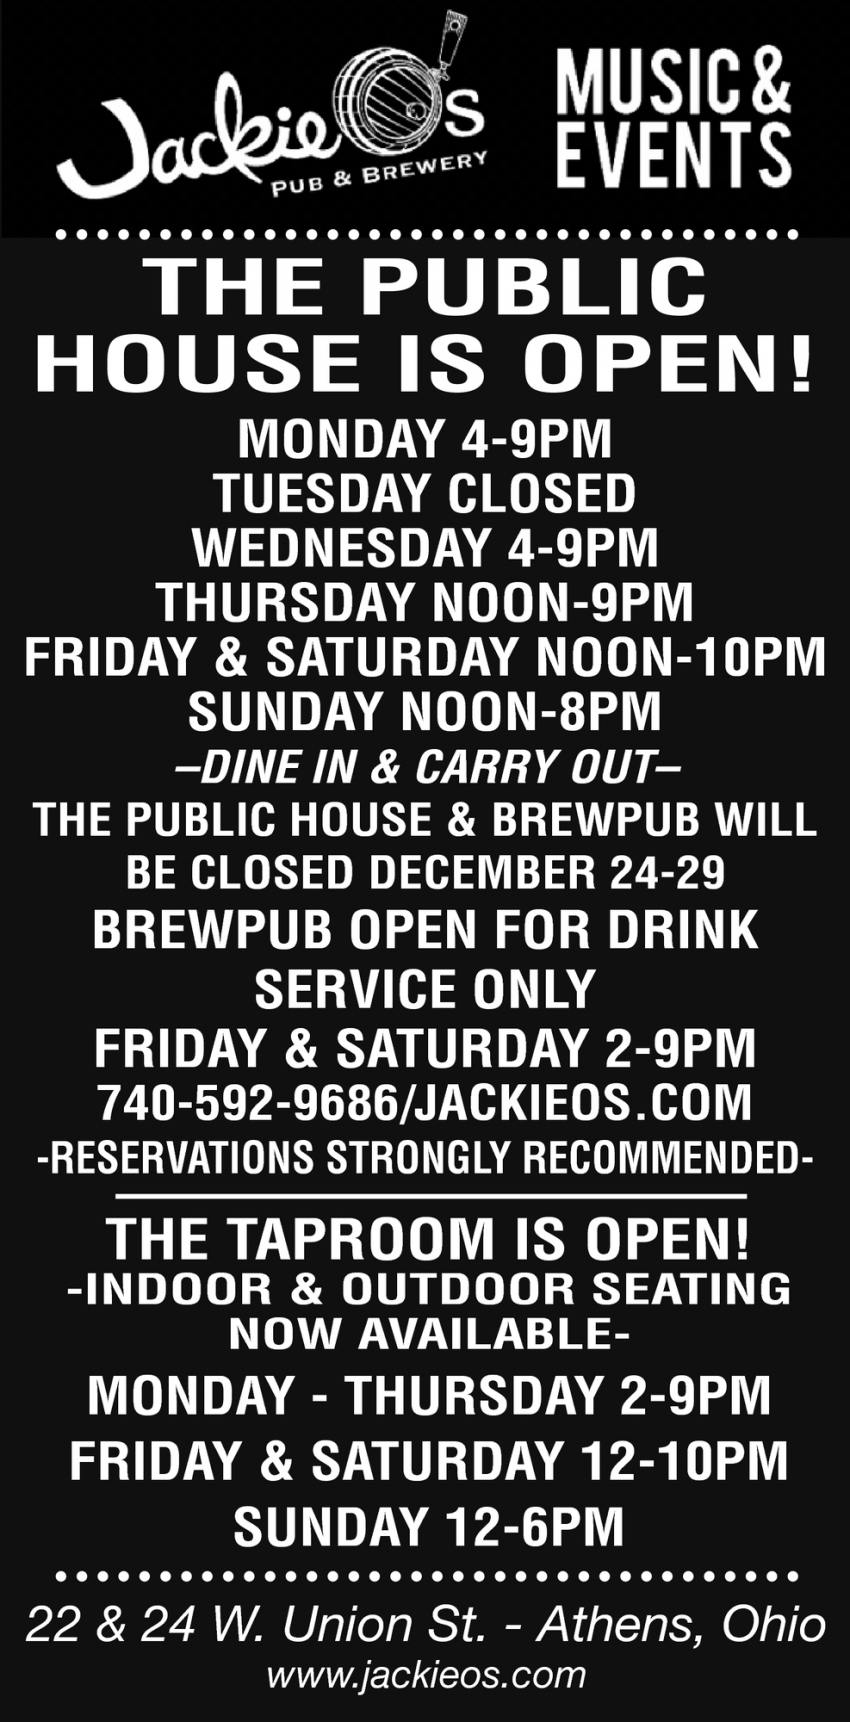 The Public House is Open!